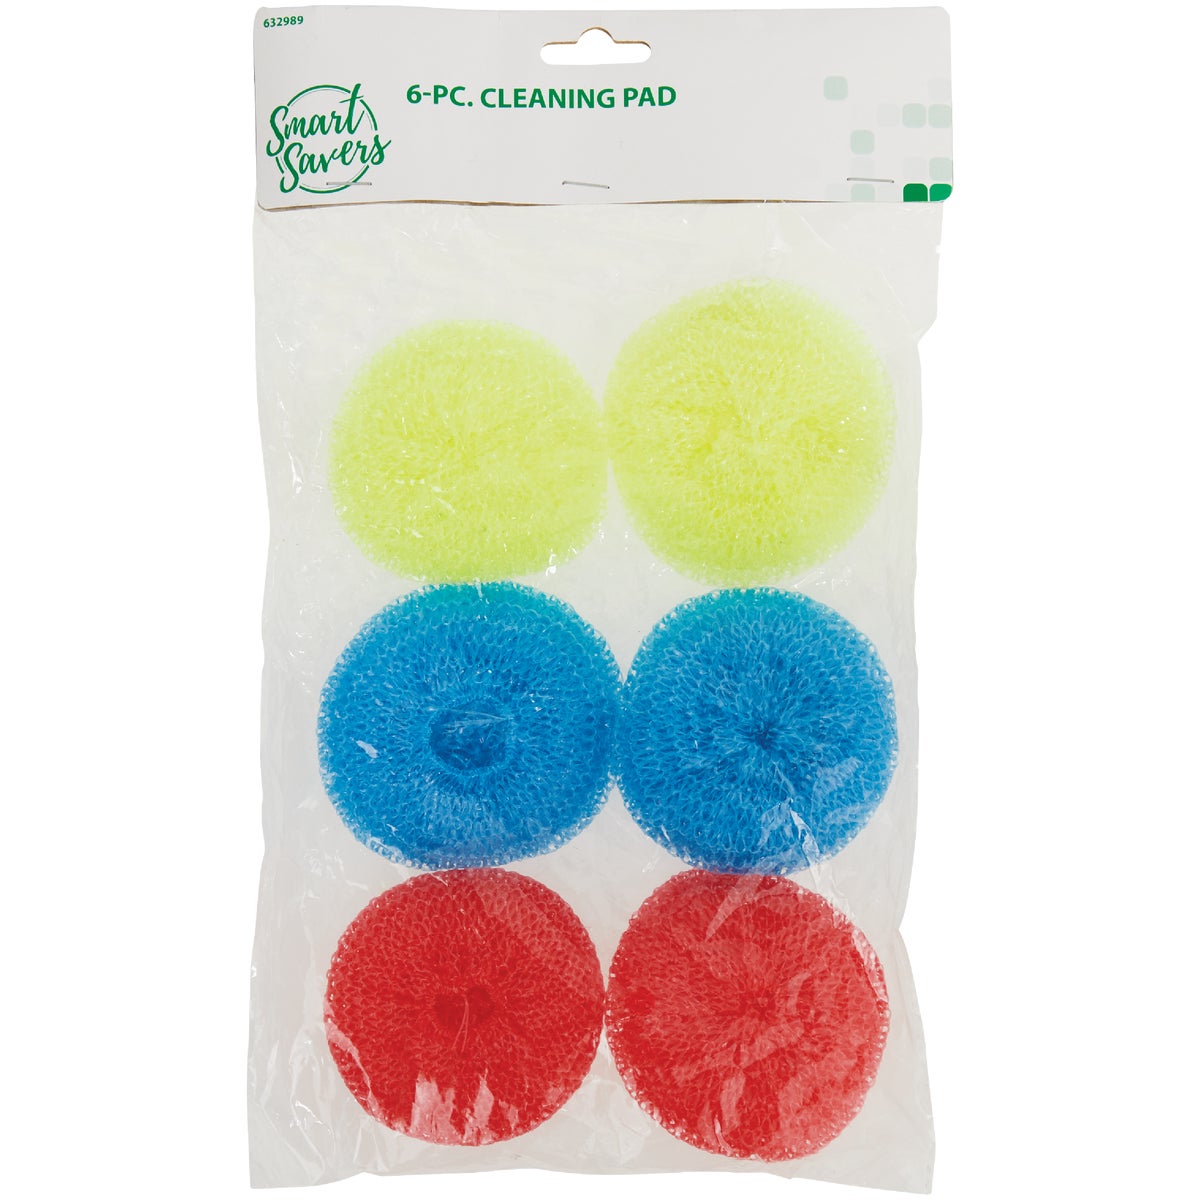 Item 632989, Smart Savers 6-piece cleaning scour pads. Ideal to remove stuck-on foods.